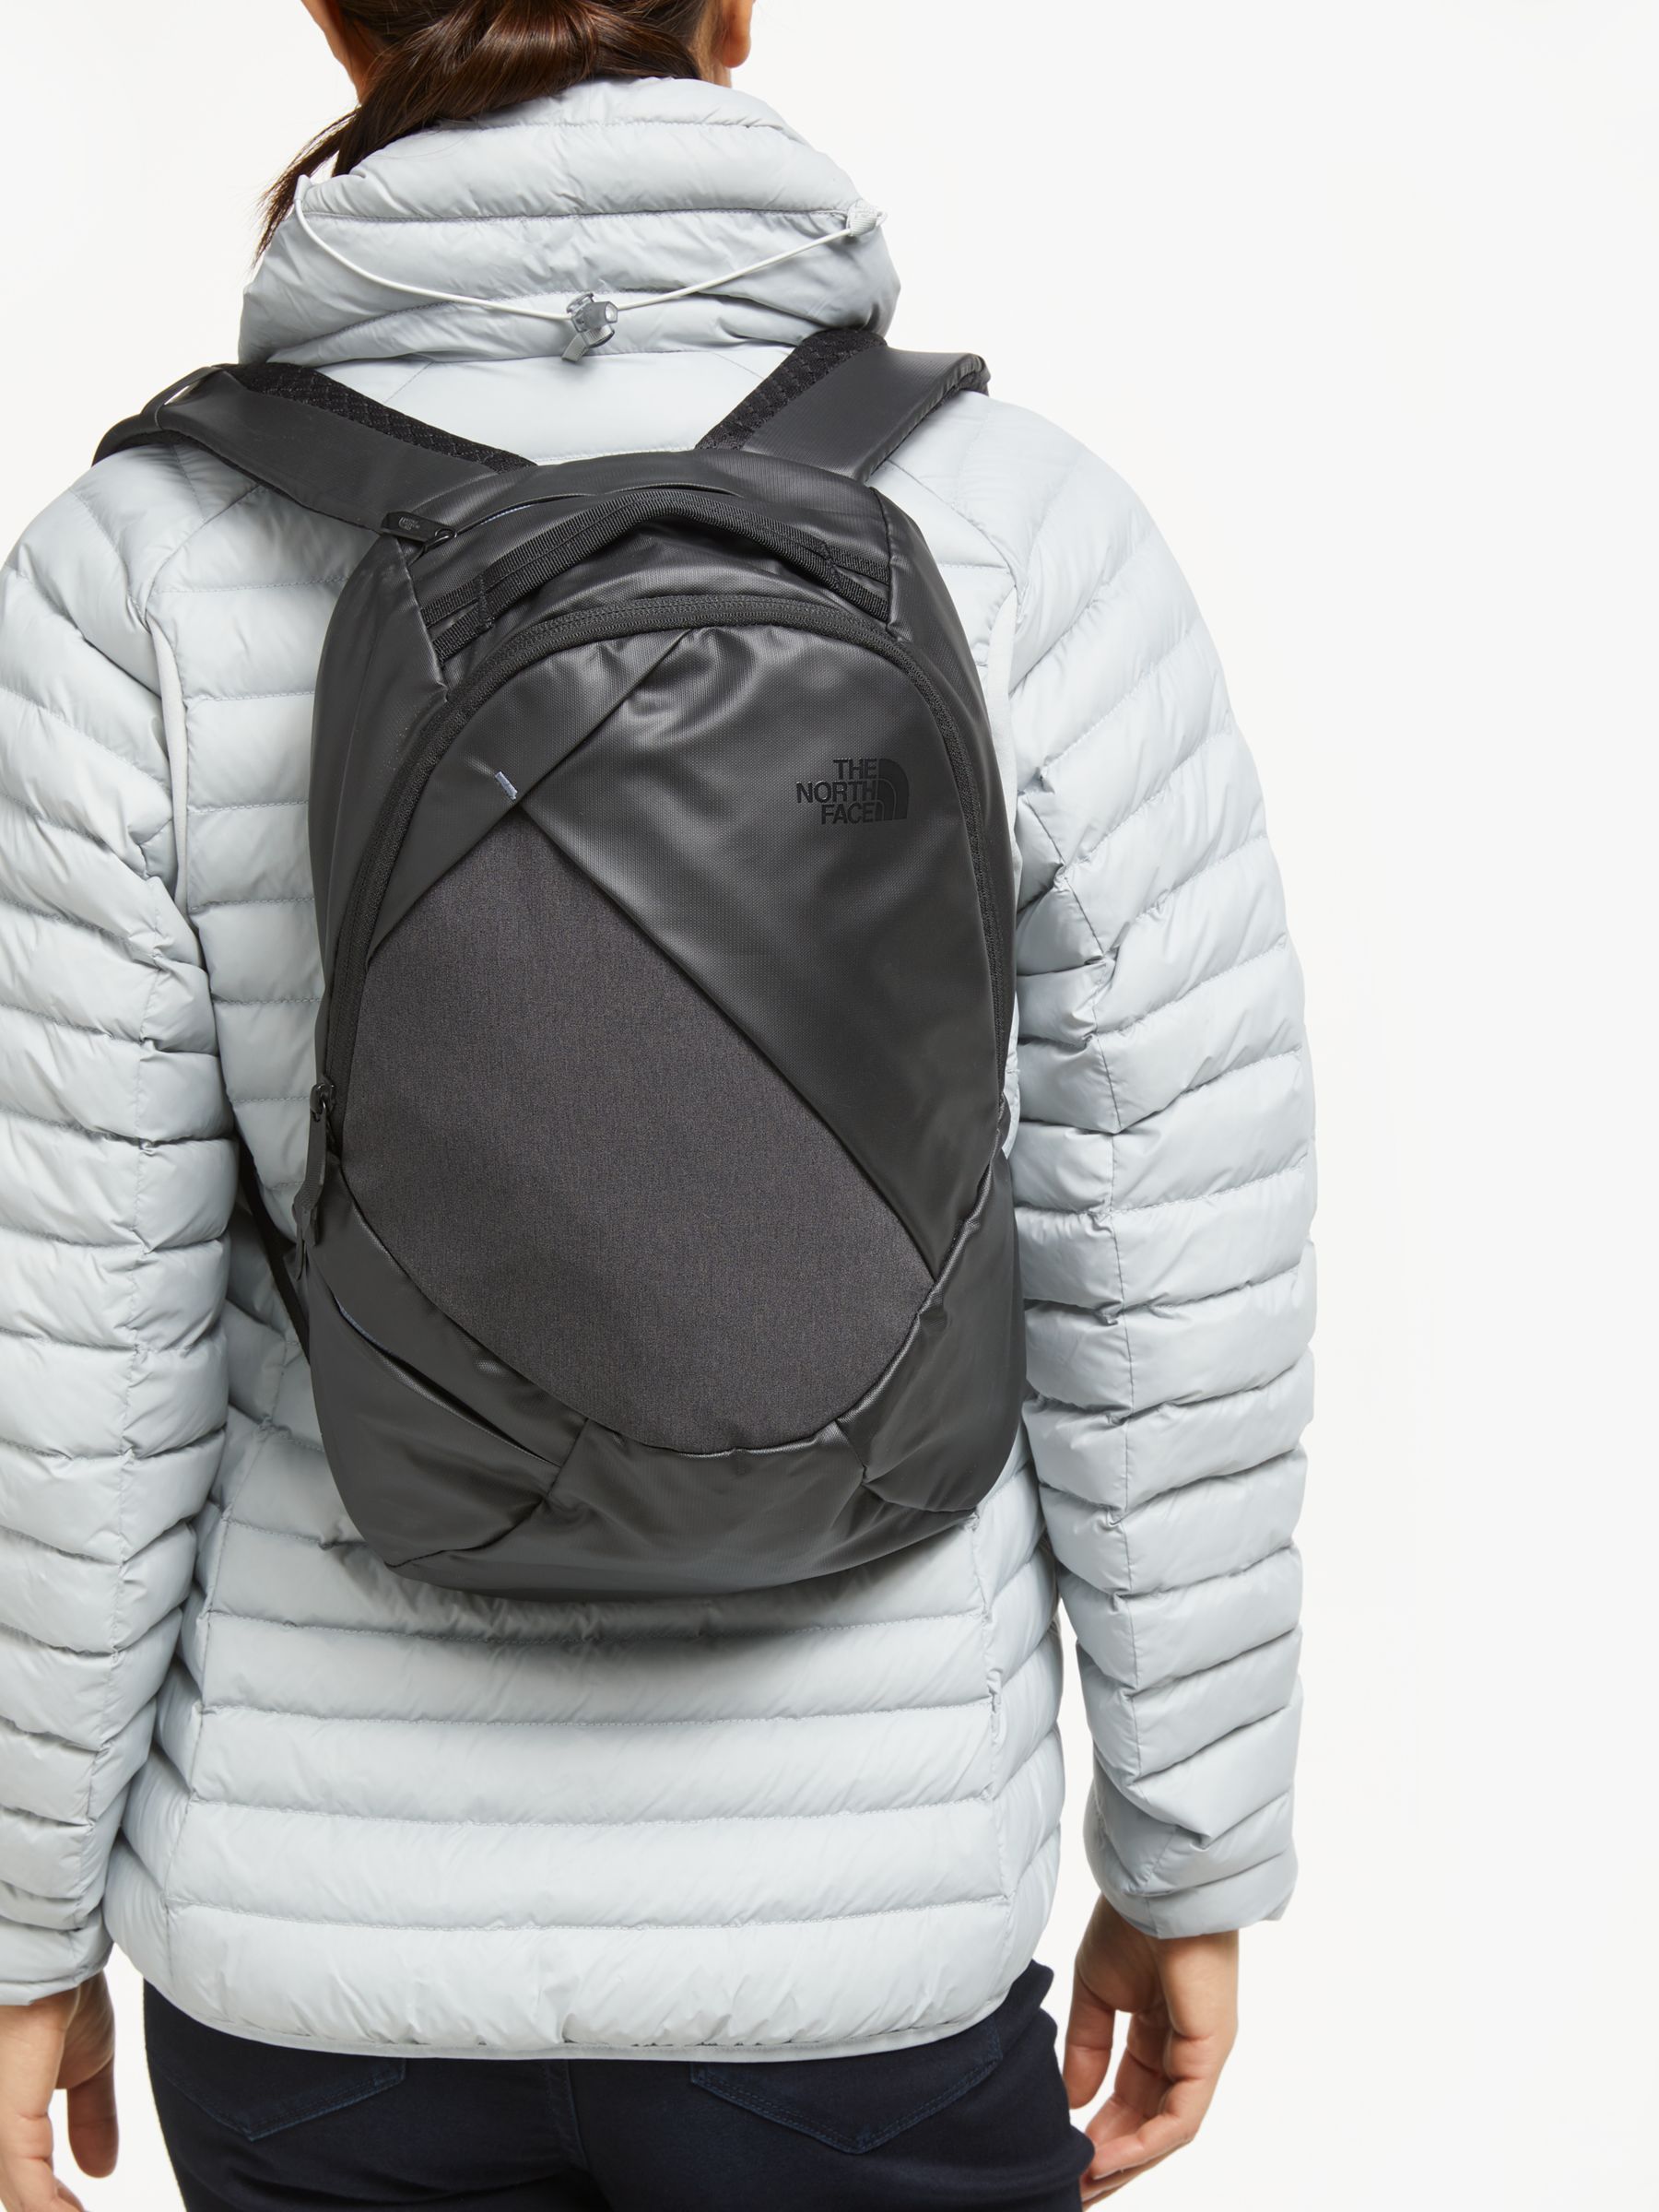 the north face electra 12l